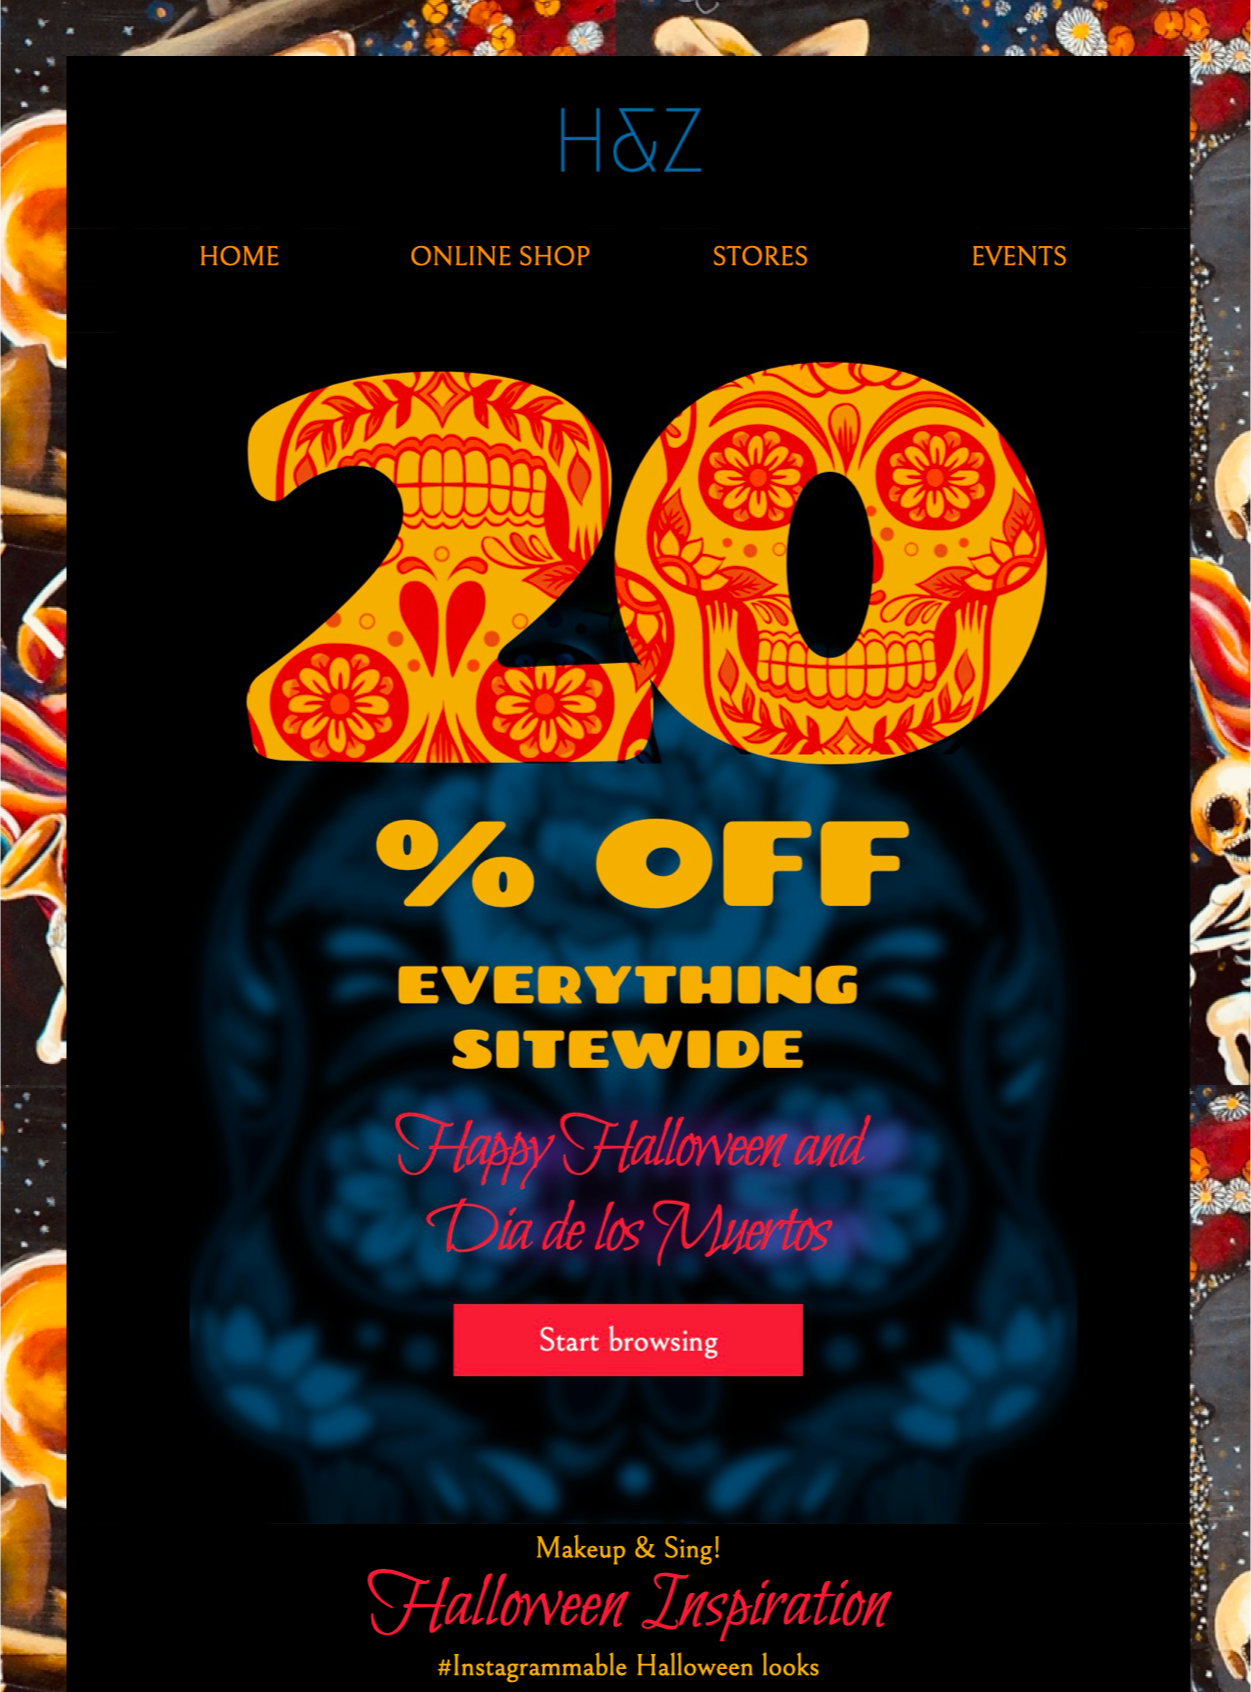 Day of the Dead email template from Mail Designer 365